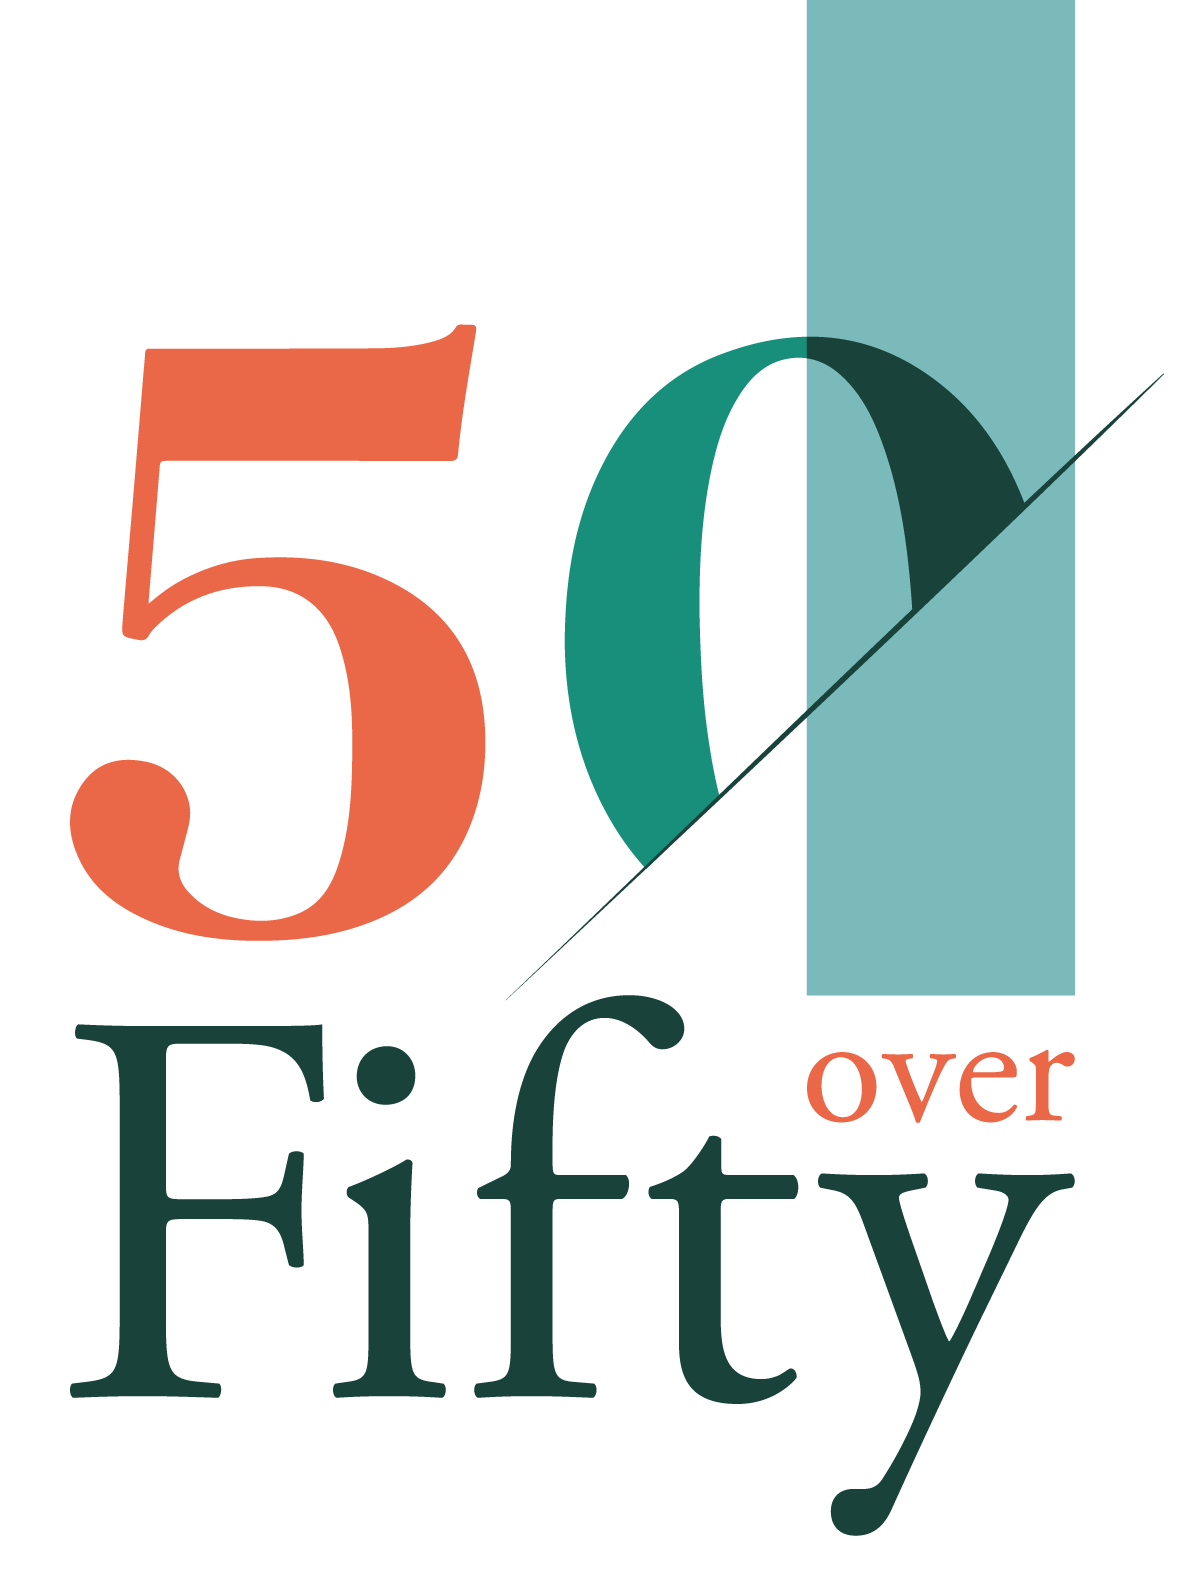 50 over Fifty